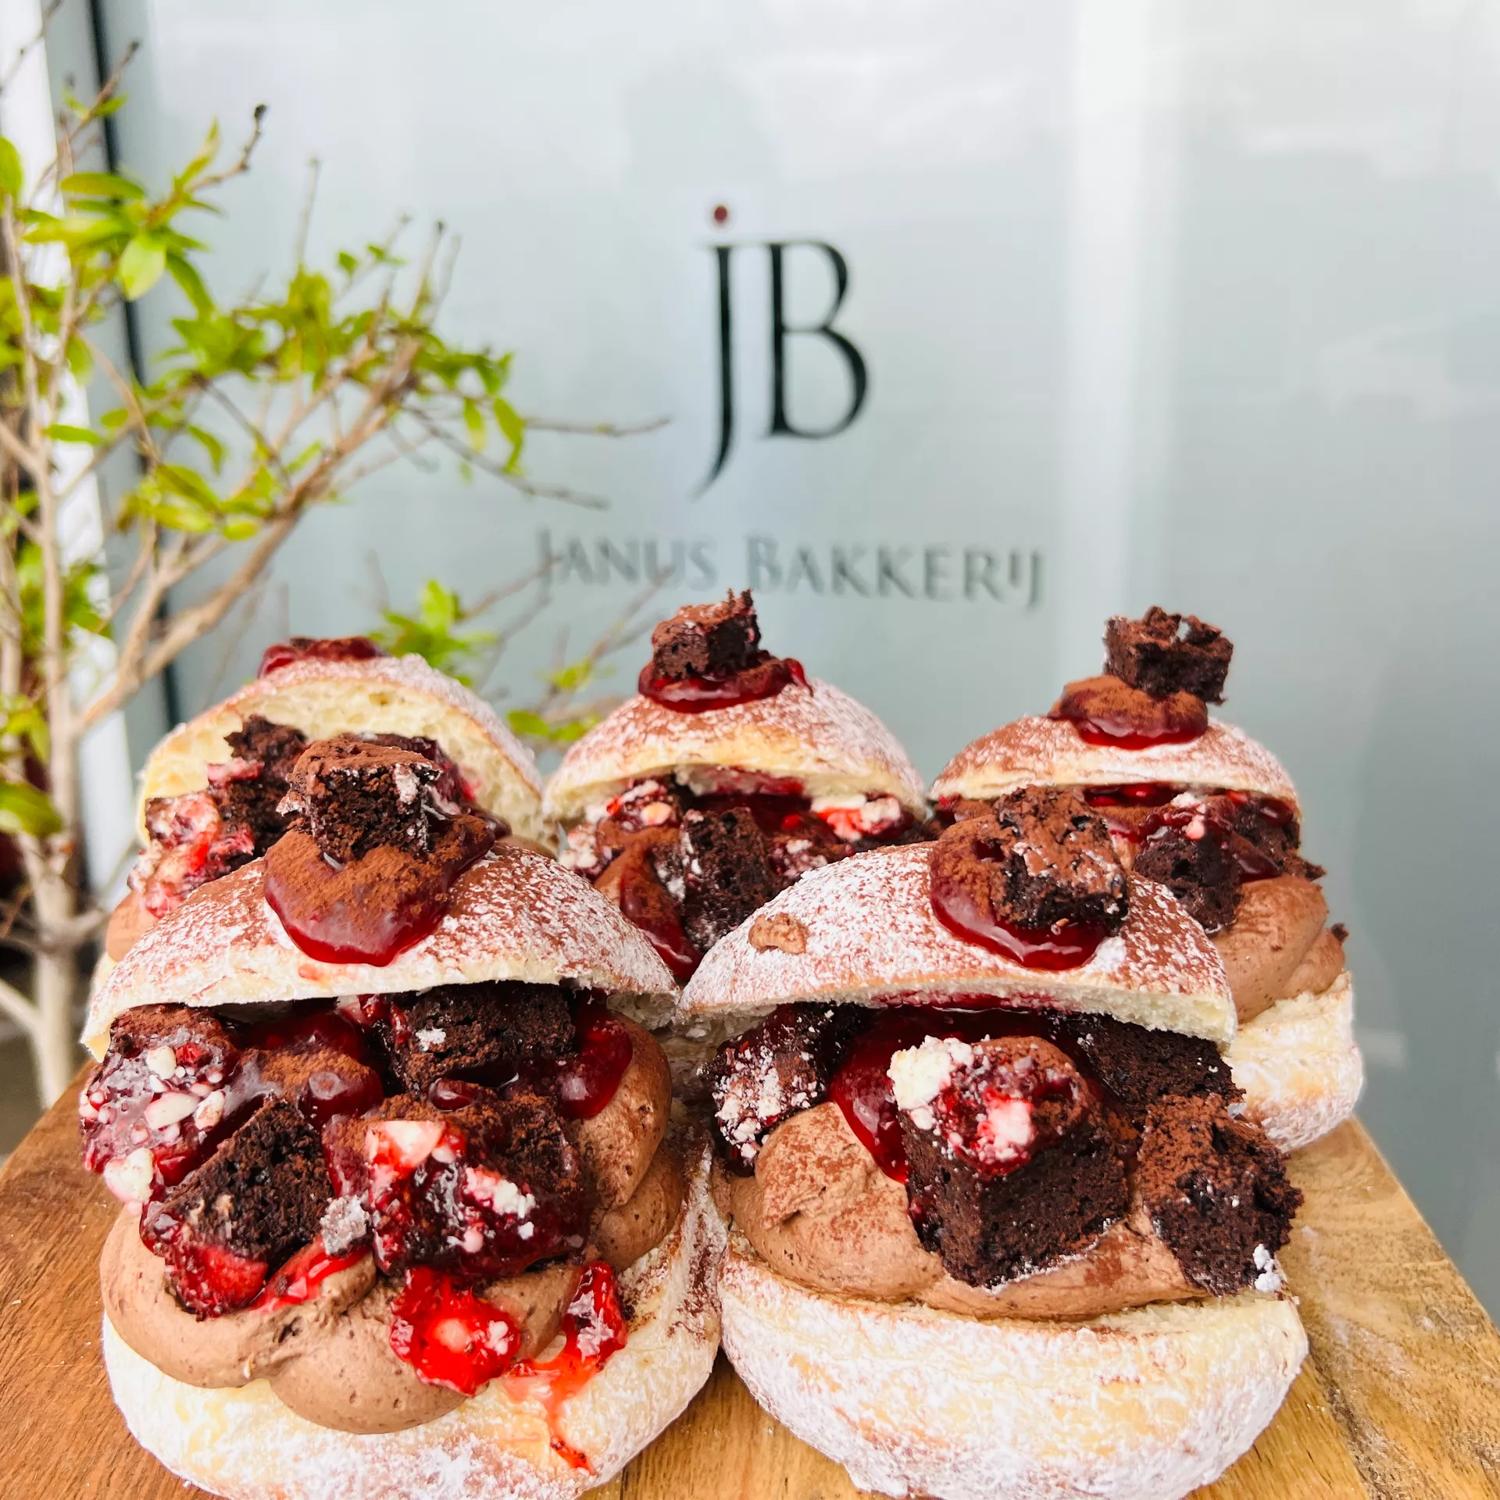 Five doughnuts sit, open-mouthed, on a wooden board. They're filled with chocolate cream, brownie pieces and strawberries.